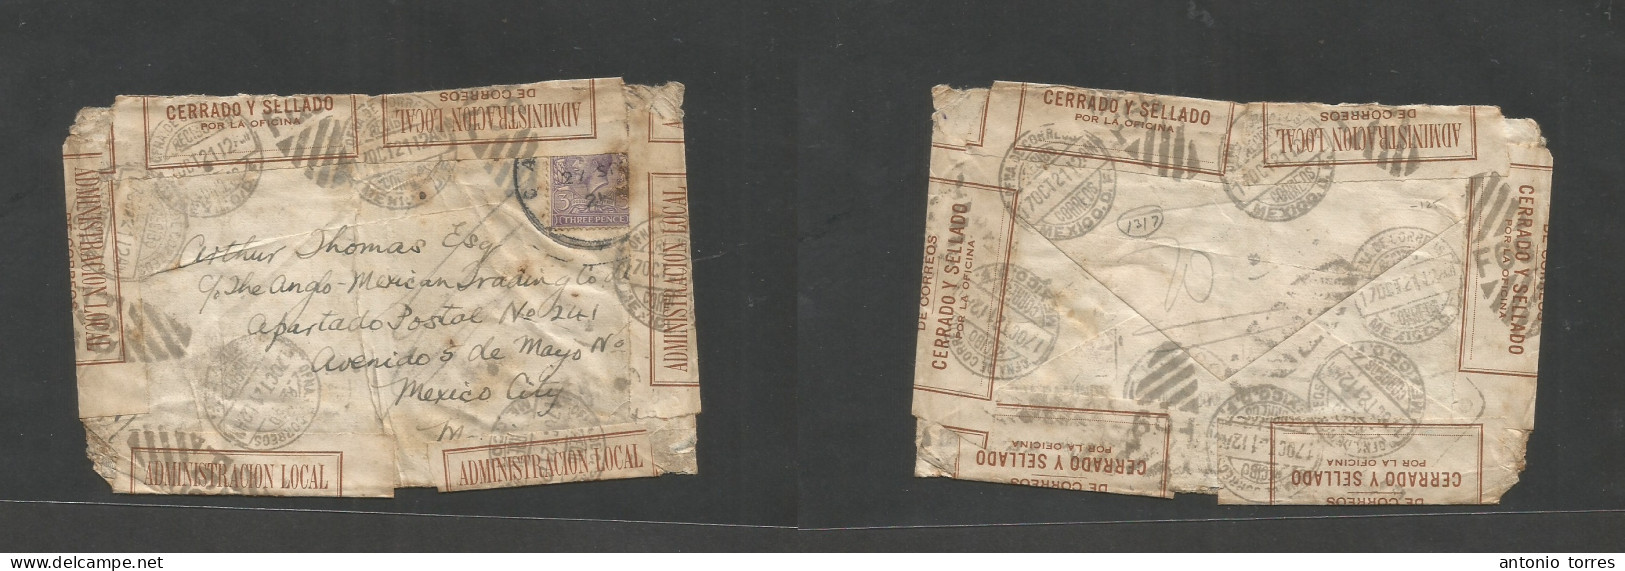 Mexico - Xx. 1921 (27 Sept) GB - DF (7 Oct) 3d Lilac Fkd Env. Arrived Opened At Edges And Sealed By Mexican Post Office - Mexico